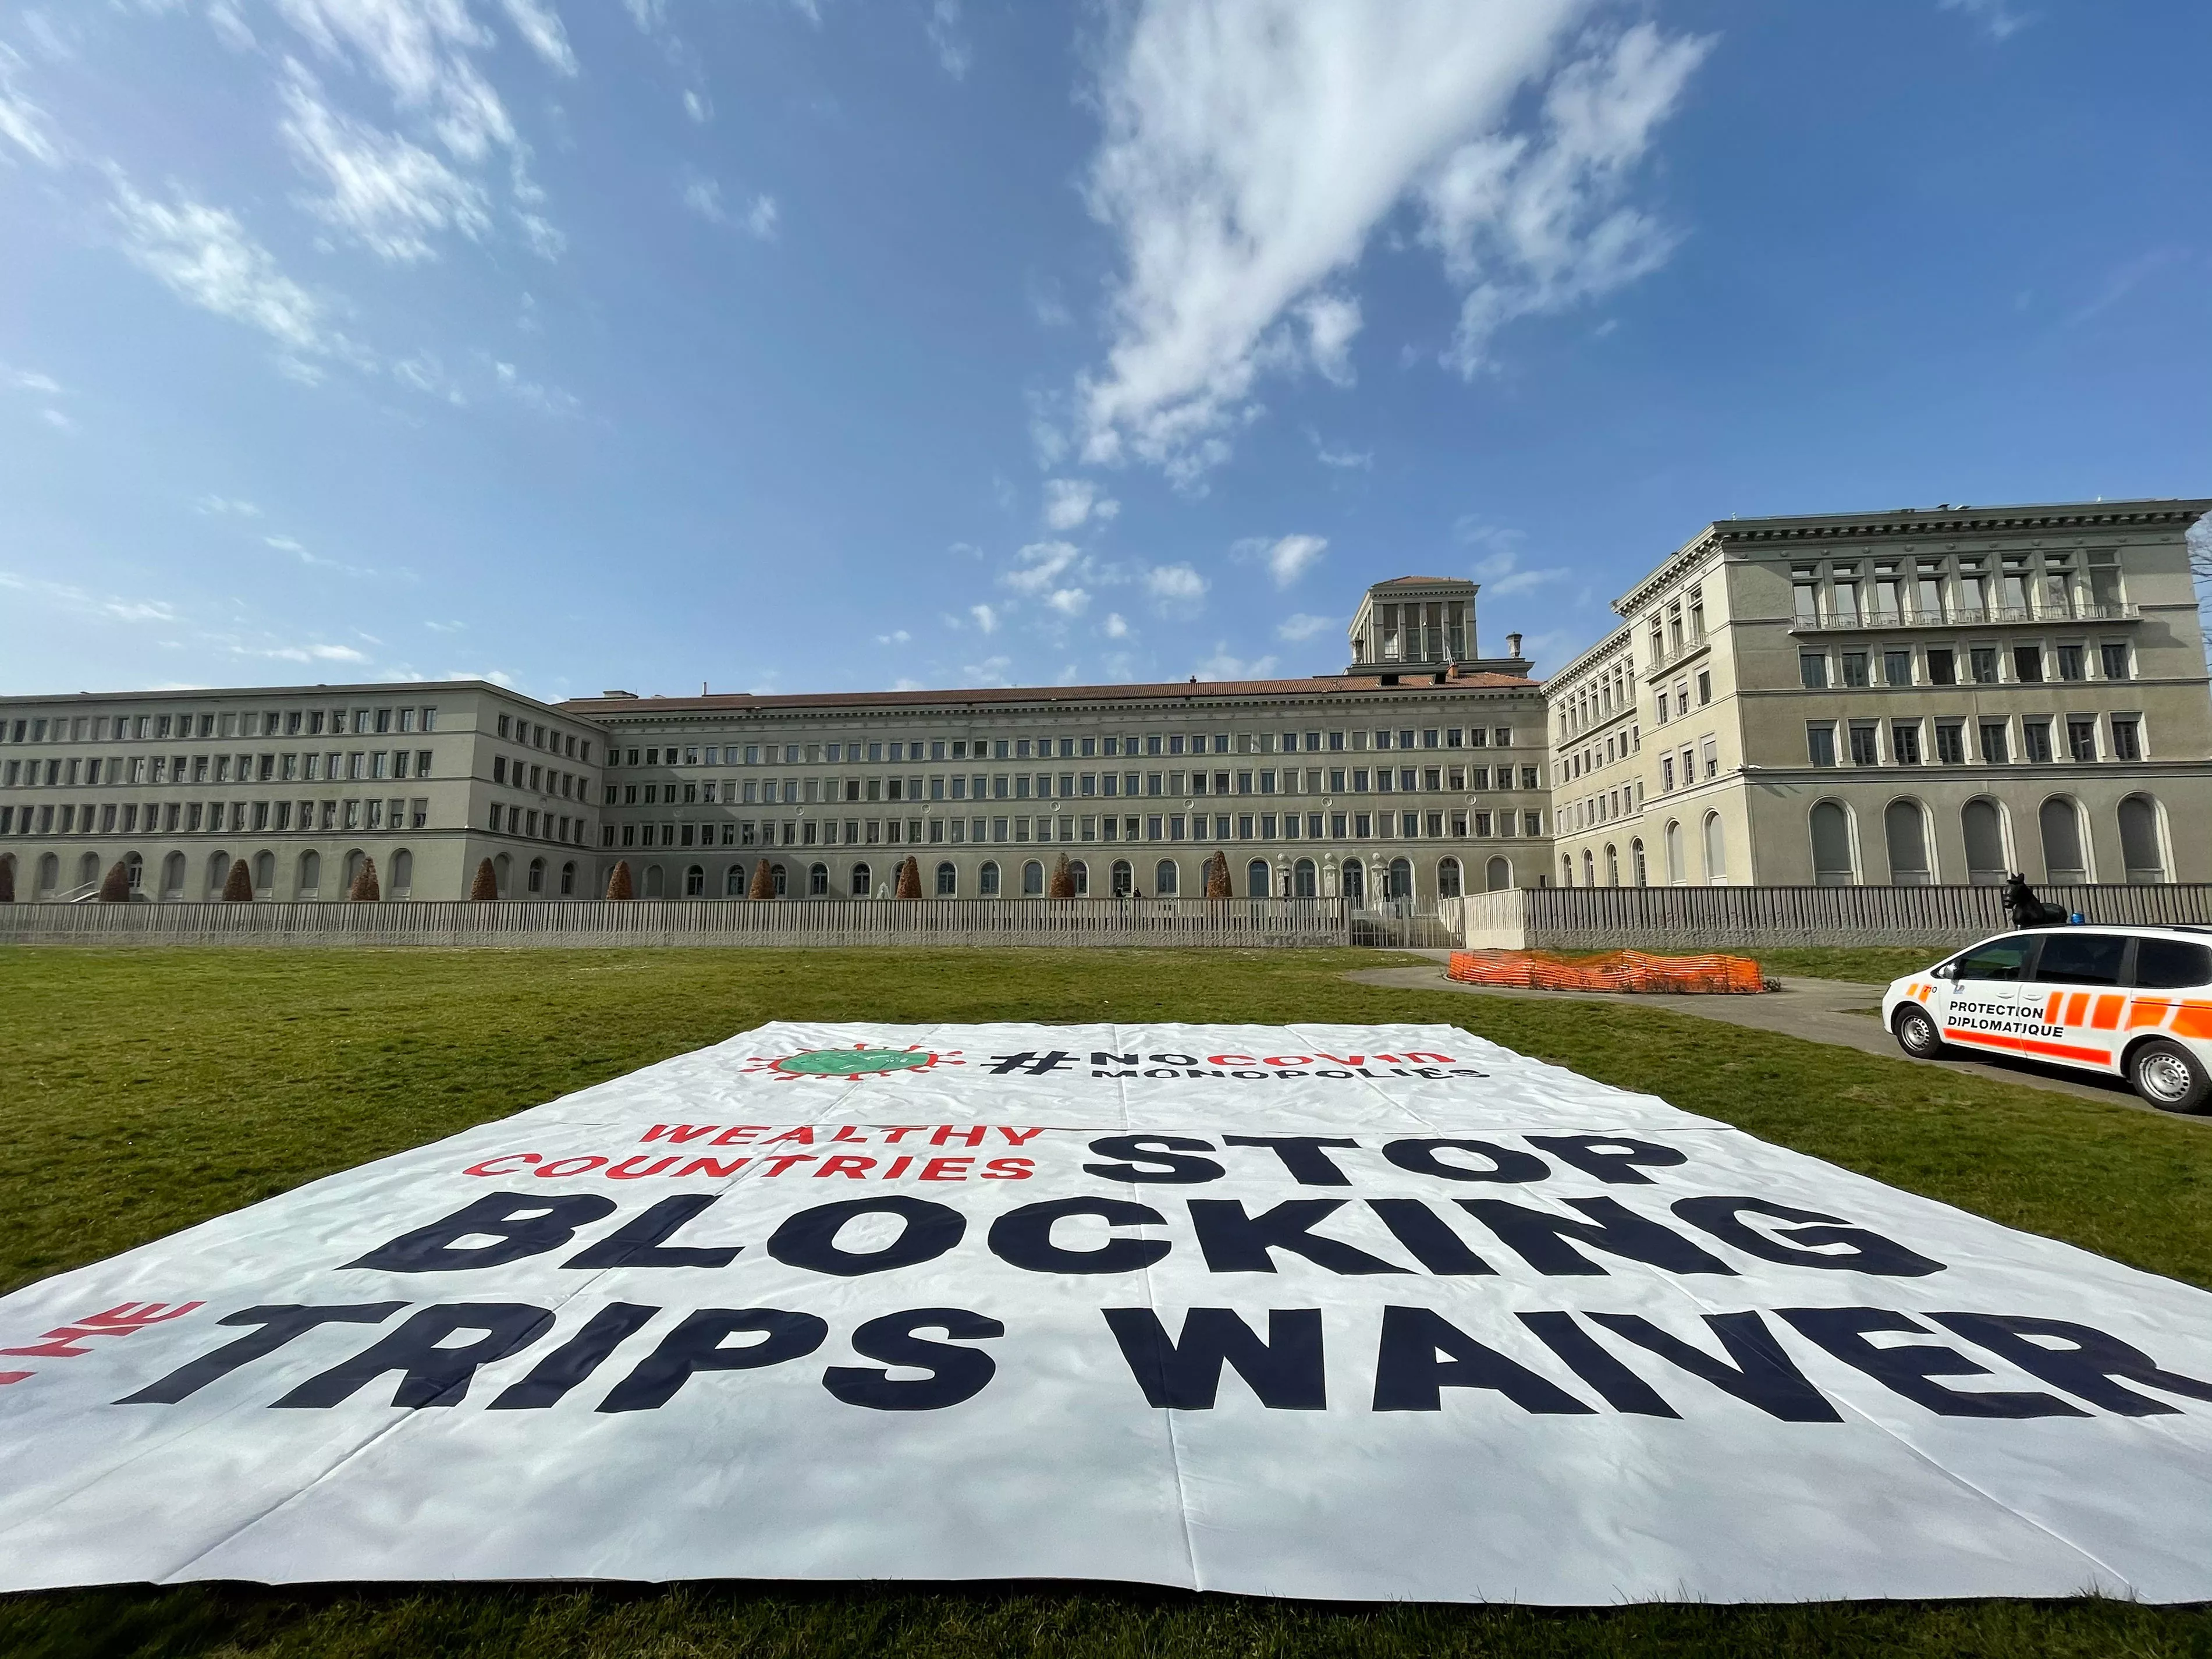 View of the banner deployed by MSF in front of the World Trade Organization (WTO) in Geneva calling on certain governments to stop blocking the landmark waiver proposal on intellectual property (IP) during the pandemic.